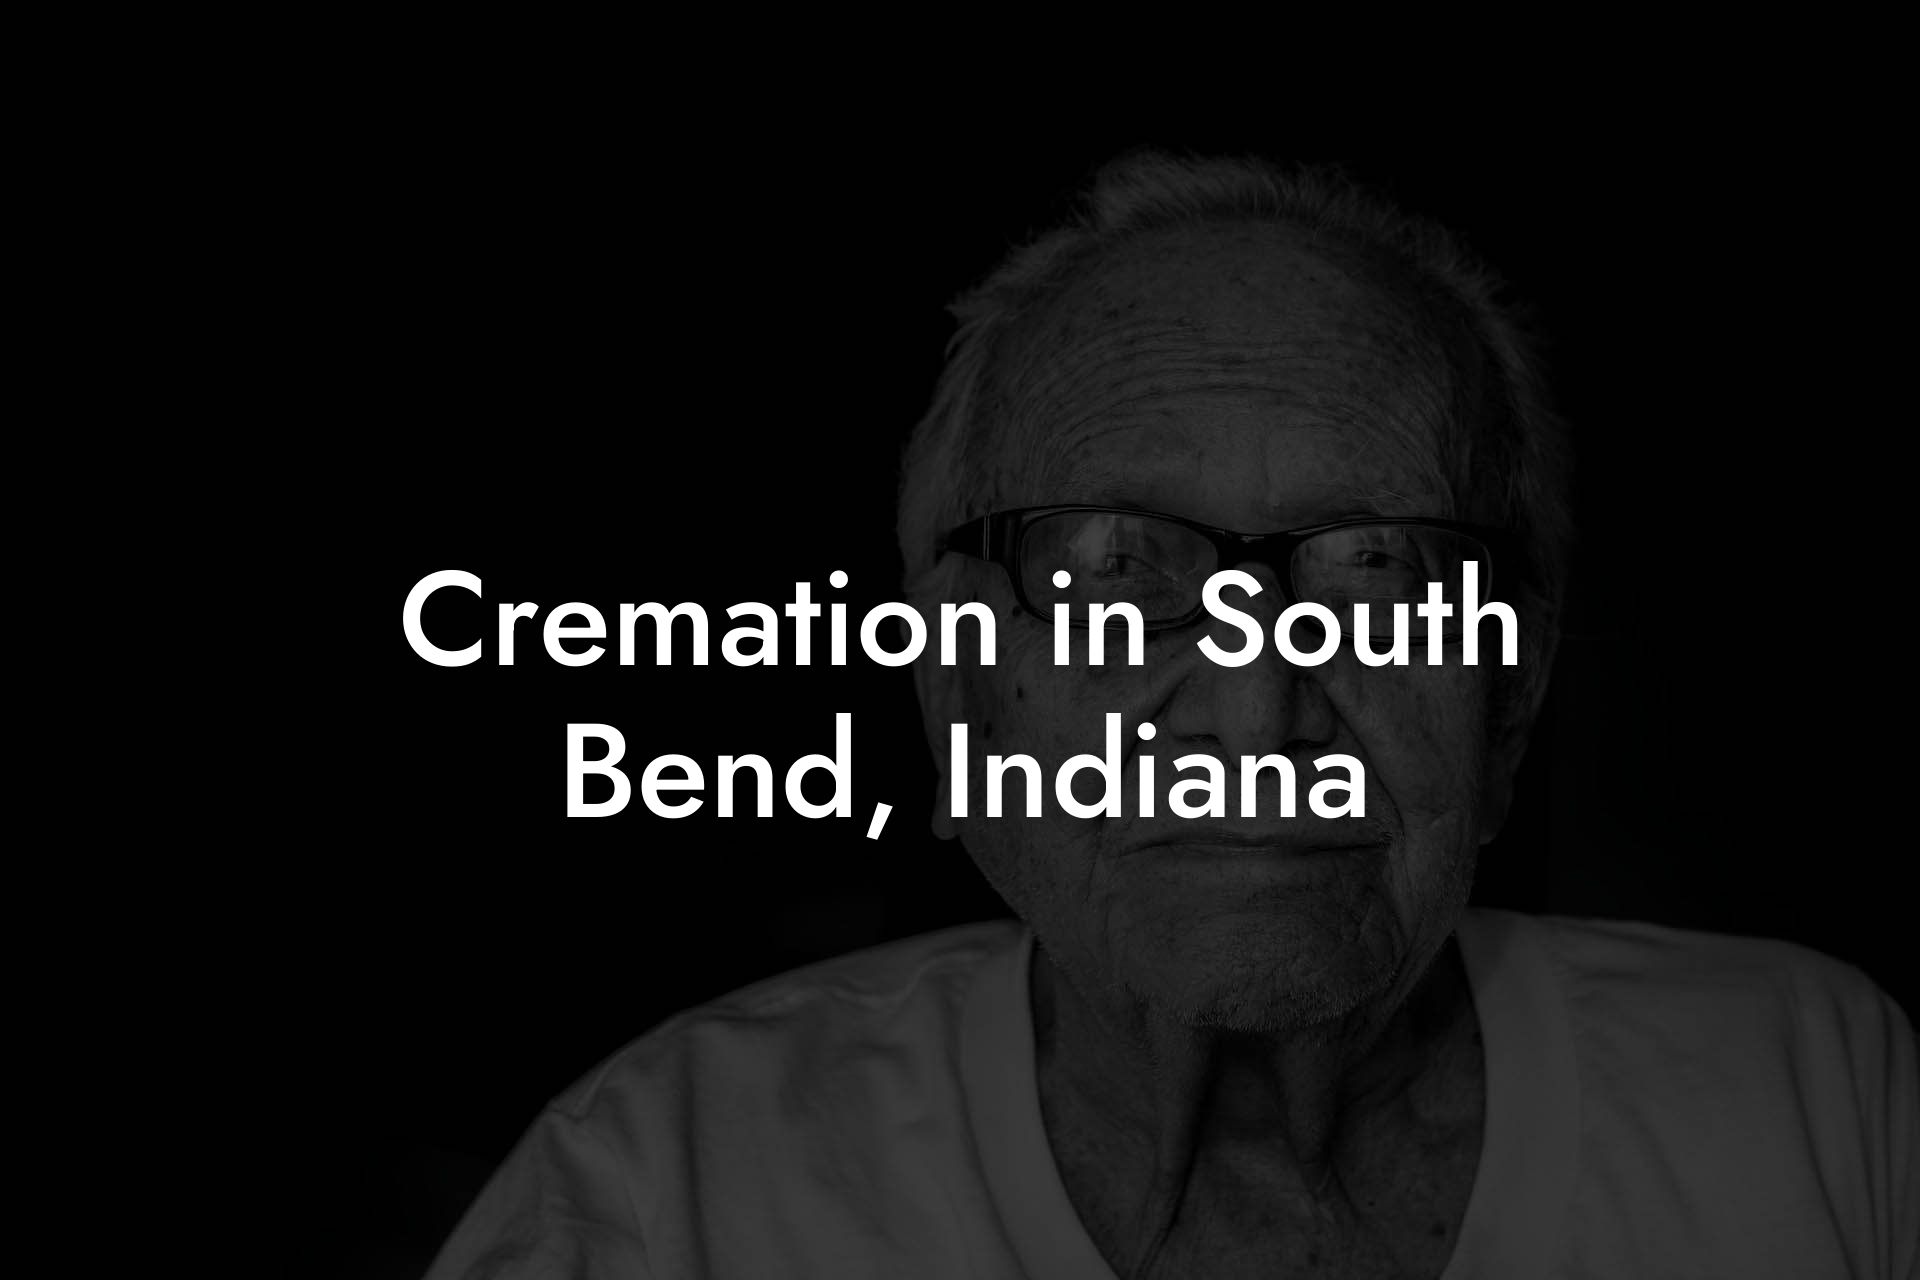 Cremation in South Bend, Indiana